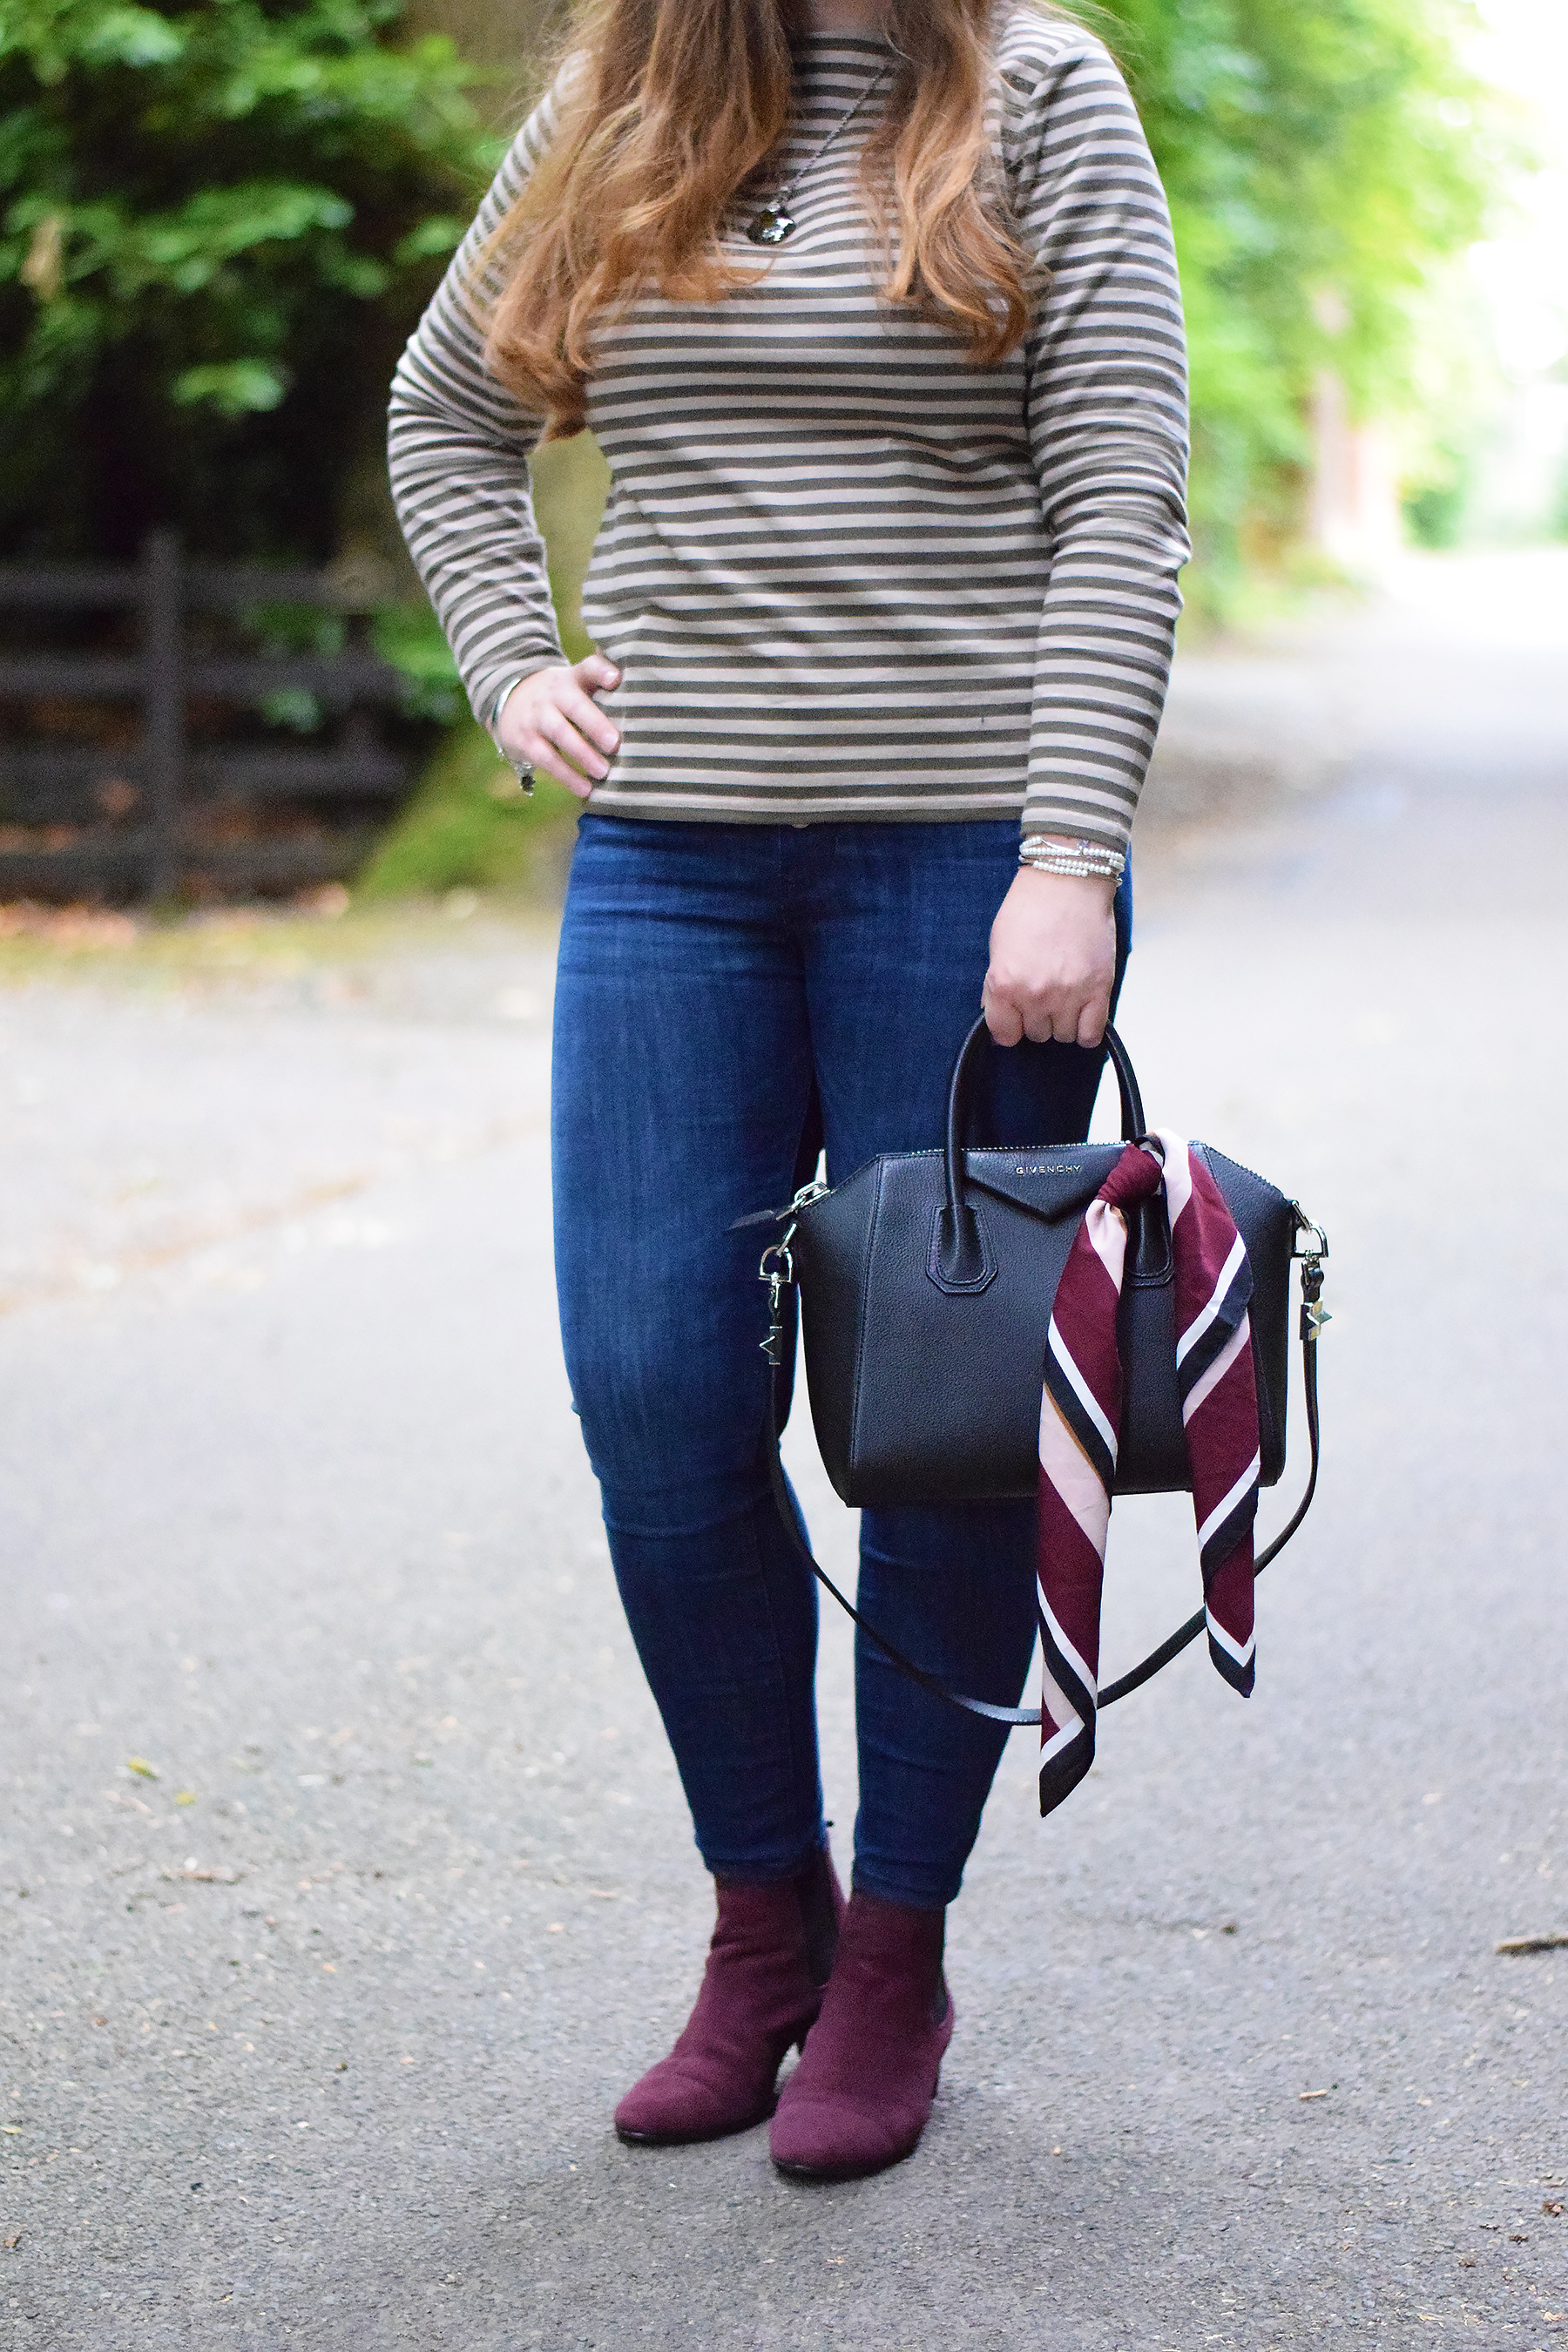 Boden Henley Ankle Boots in oxblood with green striped top